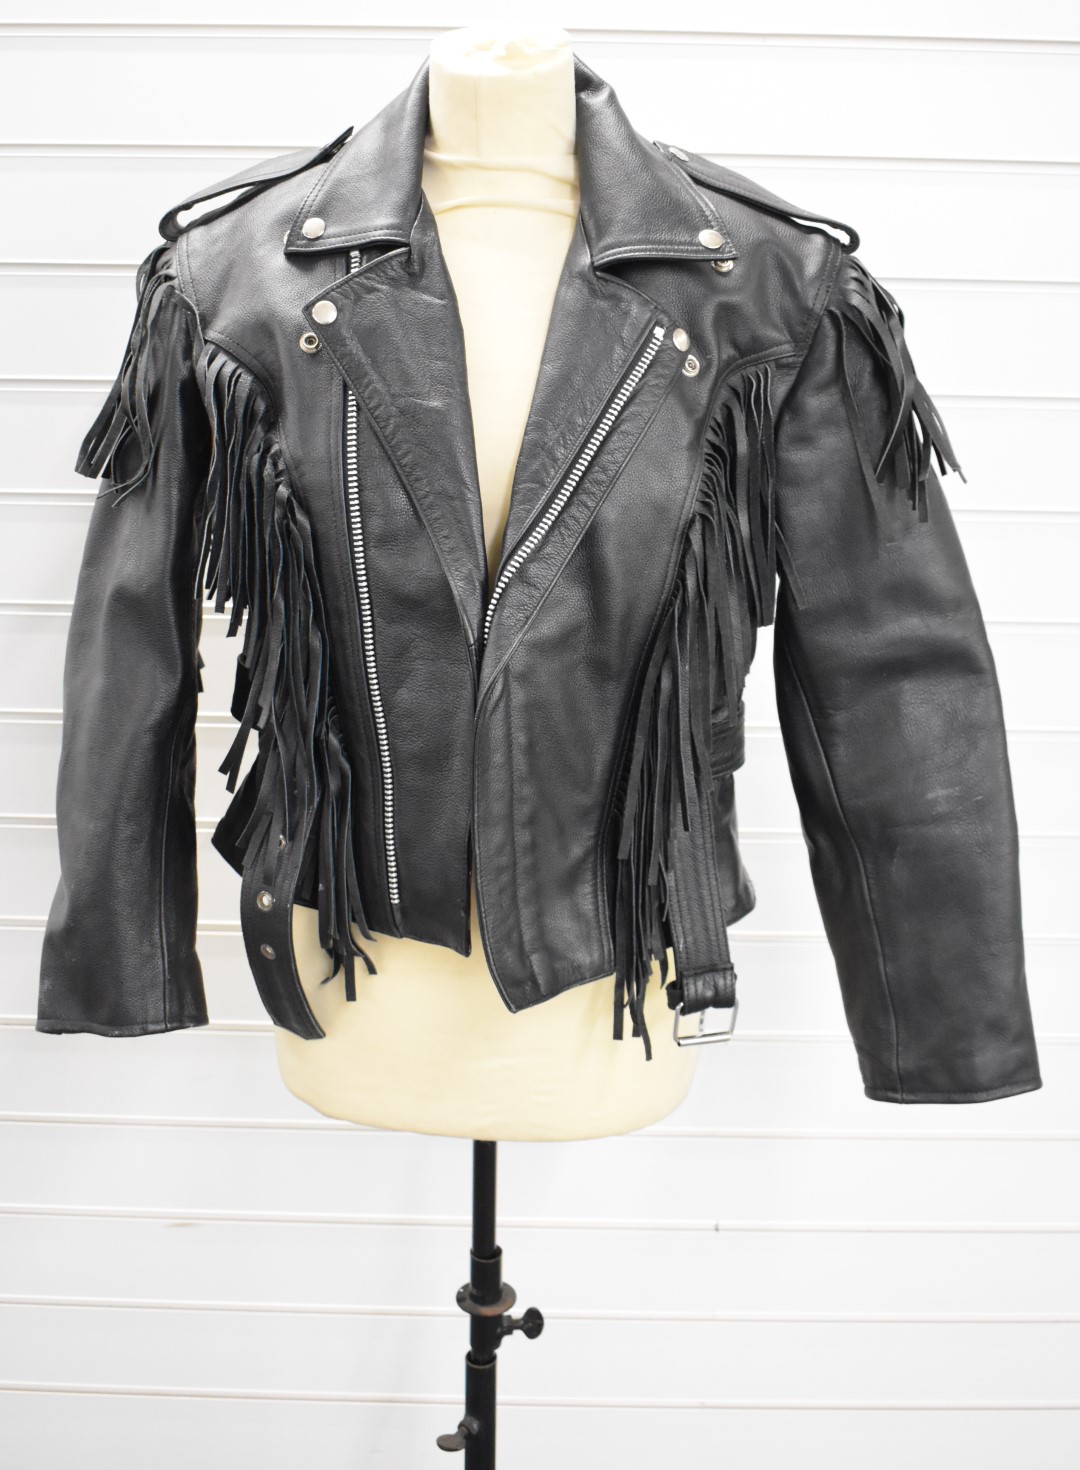 Hunter Class fringed leather motorcycle jacket and a waistcoat by Heavy Duty Leather Company, both - Image 12 of 24